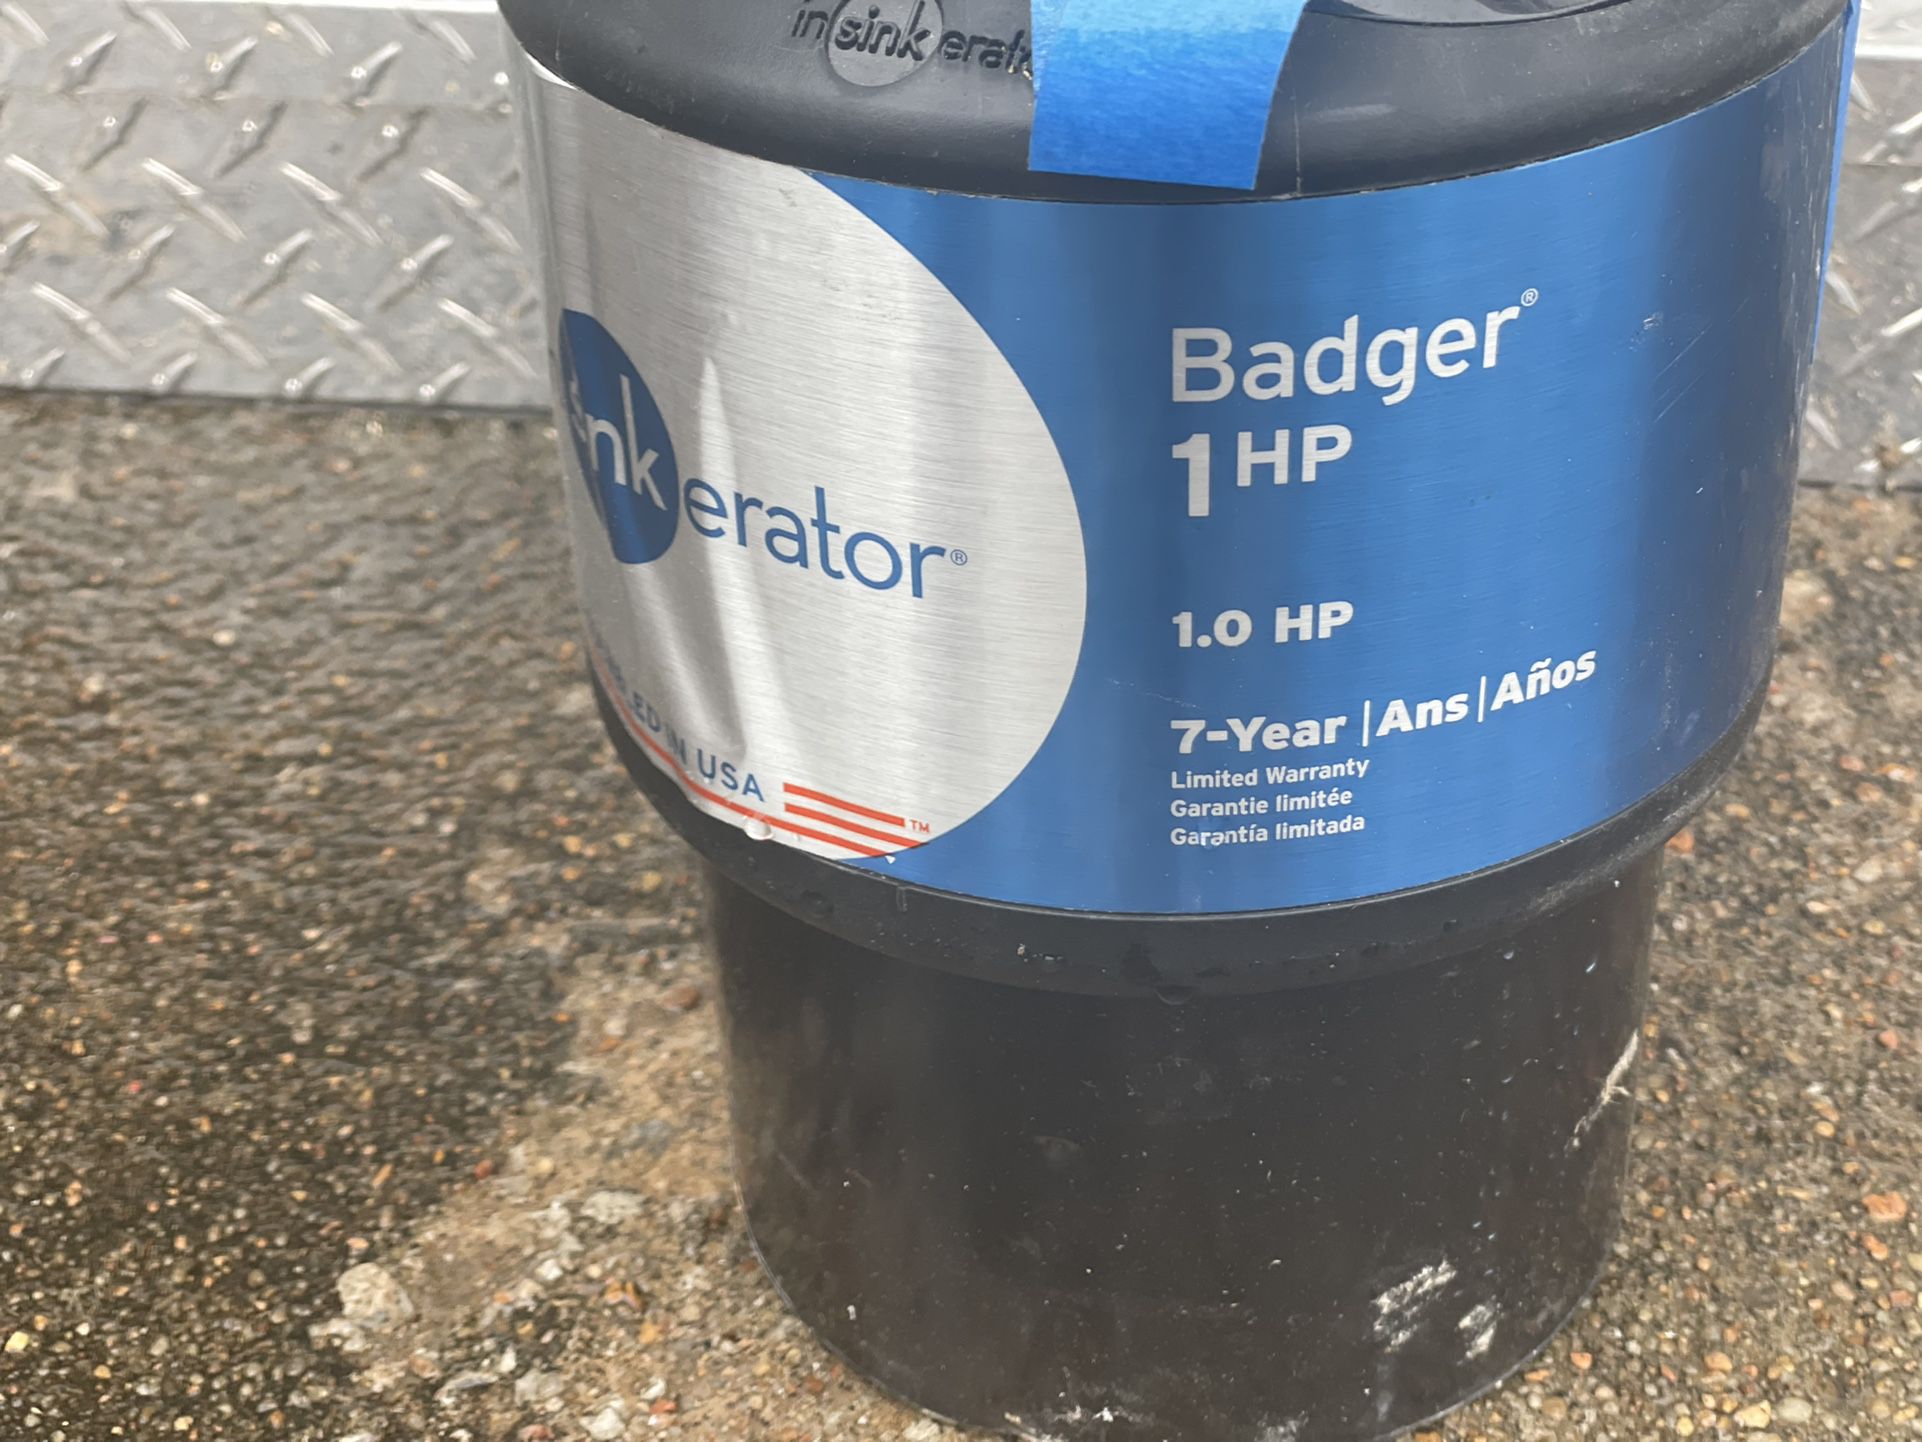 InSinkErator- 79024-ISE Garbage Disposer, Continuous Feed, Badger, 1HP,  Black for Sale in Wichita, KS OfferUp